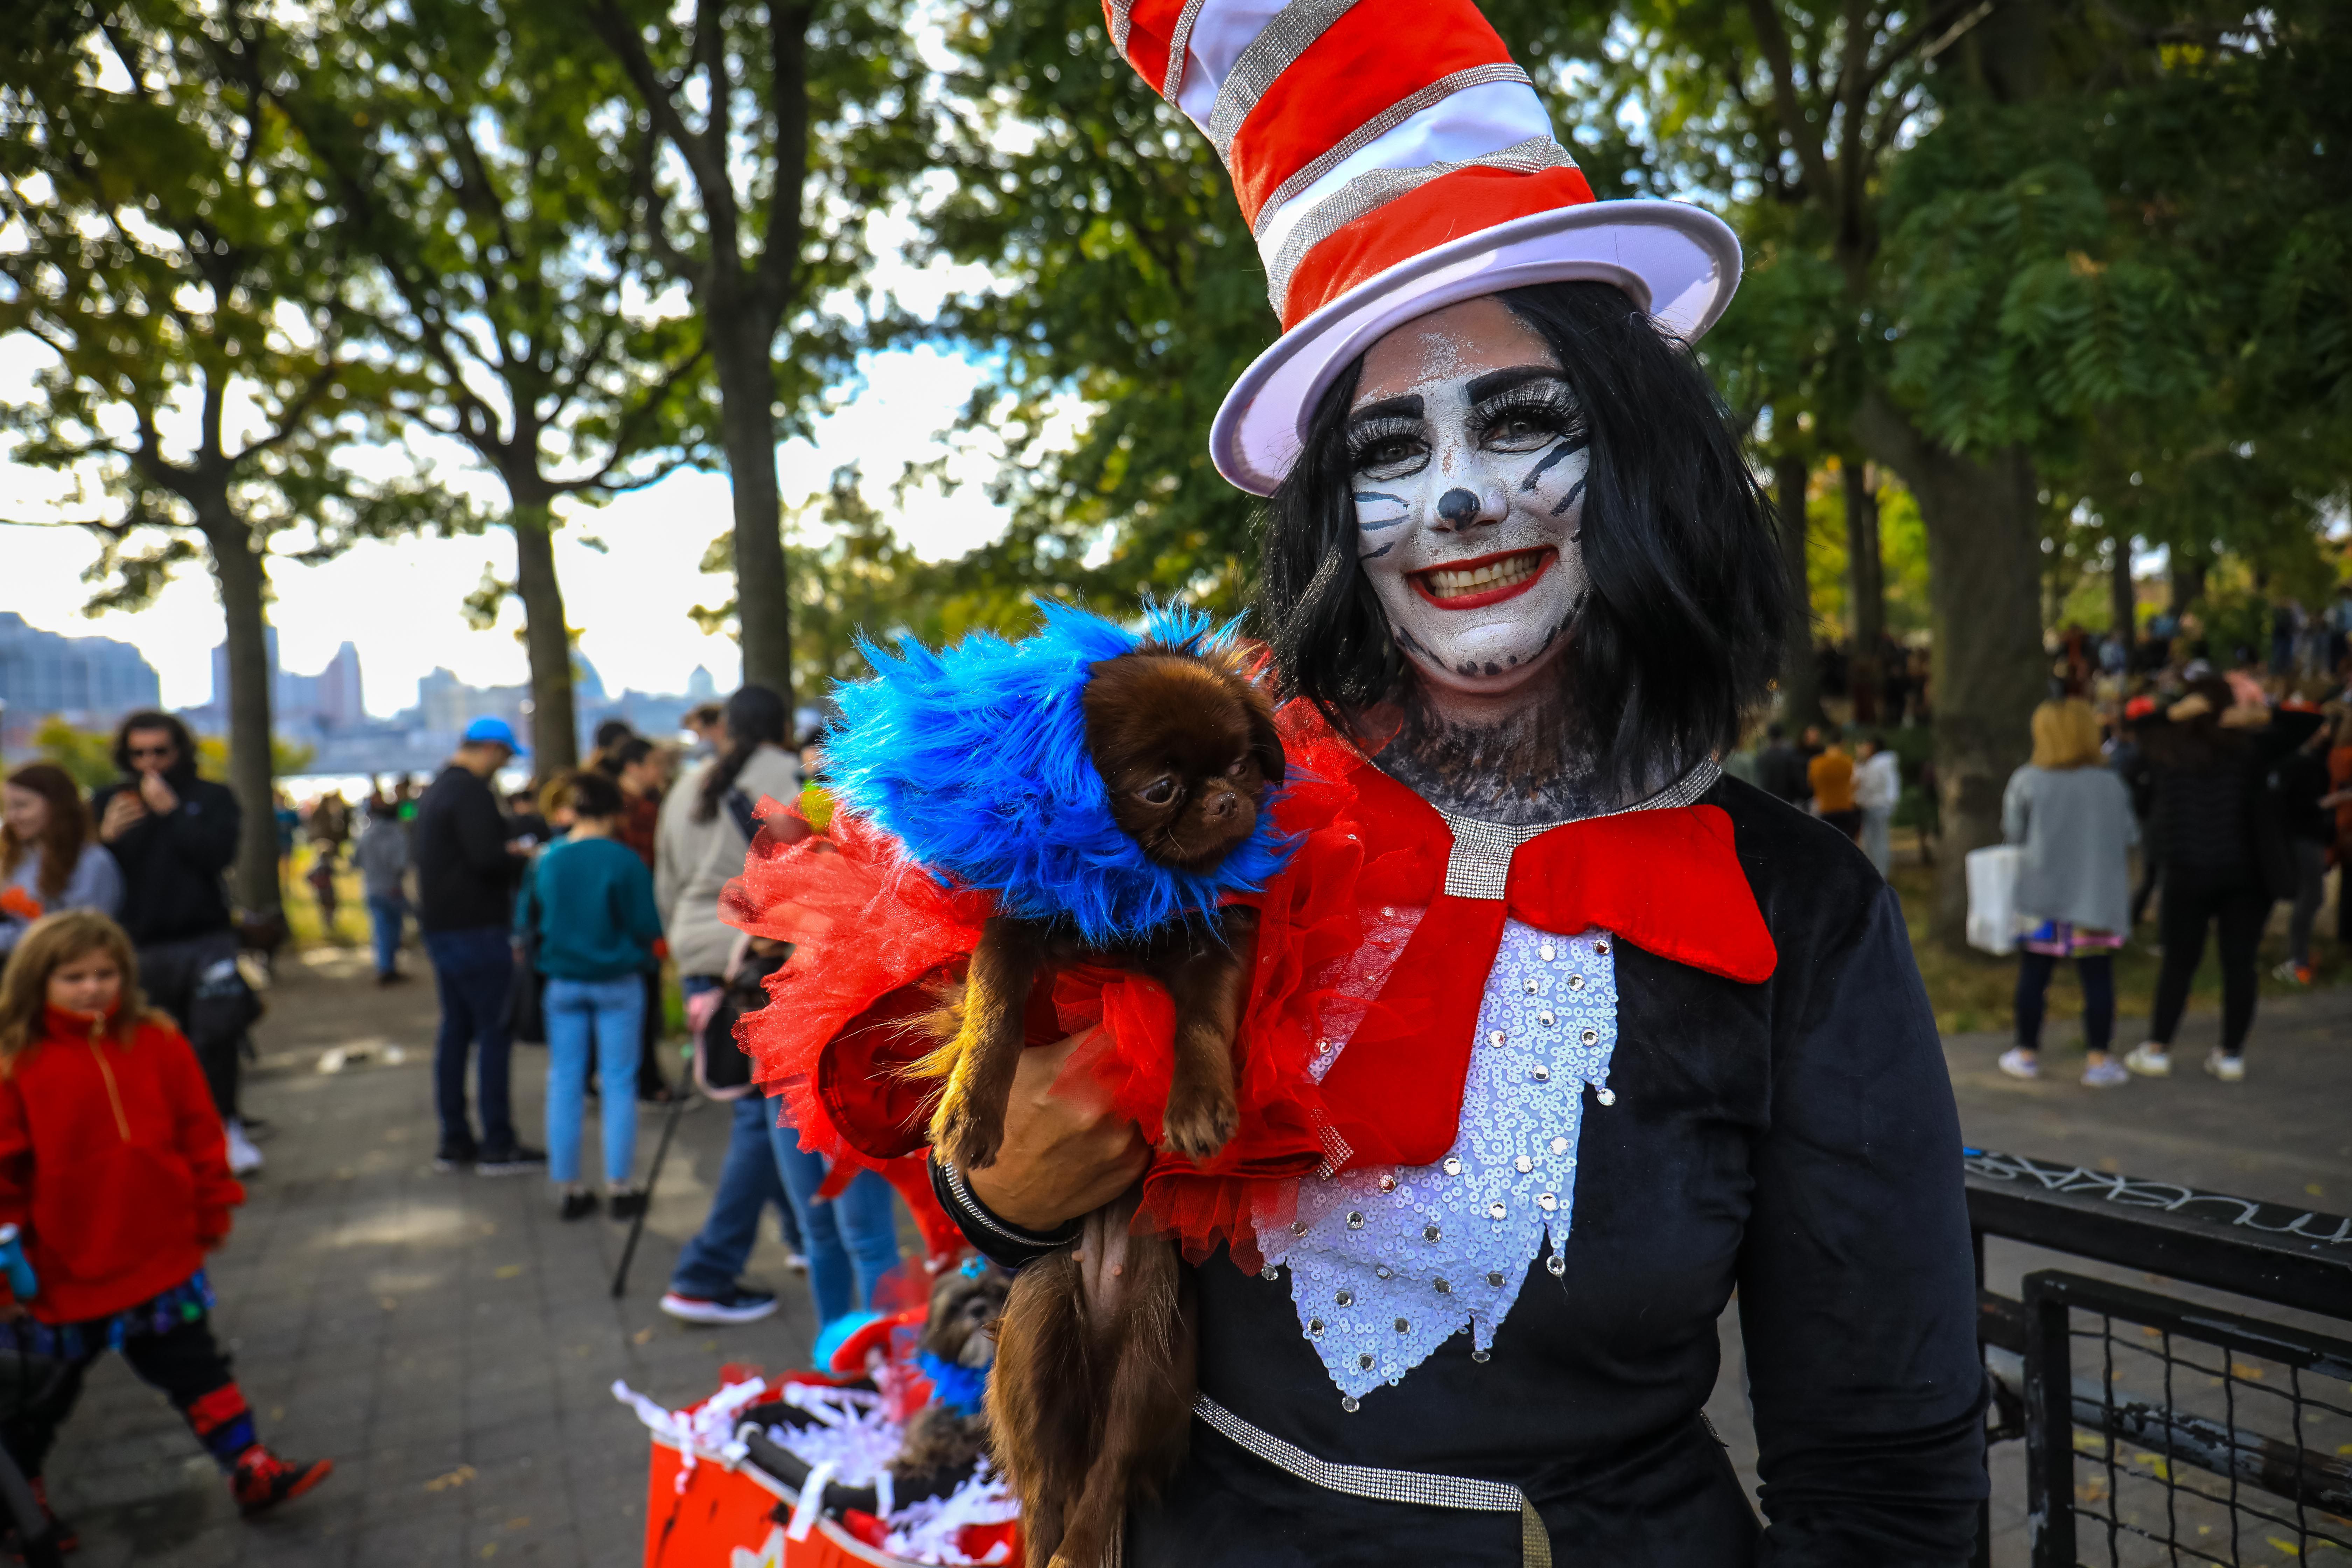 Dogs in costume at the Tompkins Square Park Halloween Parade